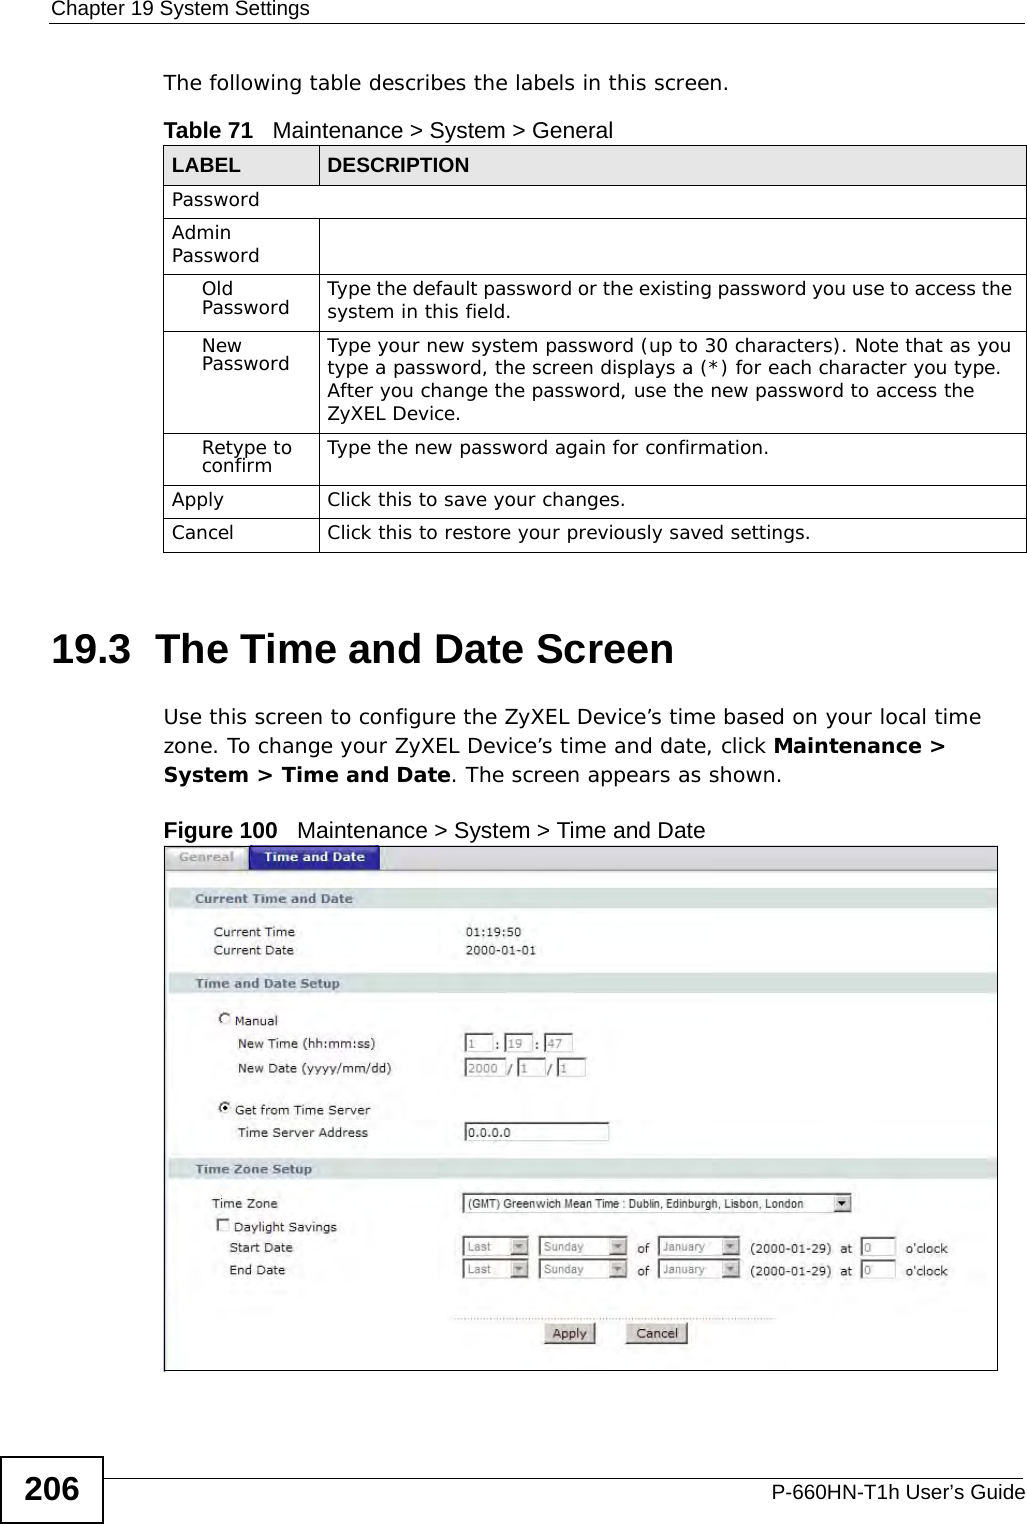 Chapter 19 System SettingsP-660HN-T1h User’s Guide206The following table describes the labels in this screen. 19.3  The Time and Date Screen Use this screen to configure the ZyXEL Device’s time based on your local time zone. To change your ZyXEL Device’s time and date, click Maintenance &gt; System &gt; Time and Date. The screen appears as shown.Figure 100   Maintenance &gt; System &gt; Time and DateTable 71   Maintenance &gt; System &gt; GeneralLABEL DESCRIPTIONPasswordAdmin PasswordOld Password Type the default password or the existing password you use to access the system in this field.New Password Type your new system password (up to 30 characters). Note that as you type a password, the screen displays a (*) for each character you type. After you change the password, use the new password to access the ZyXEL Device.Retype to confirm Type the new password again for confirmation.Apply Click this to save your changes.Cancel Click this to restore your previously saved settings.